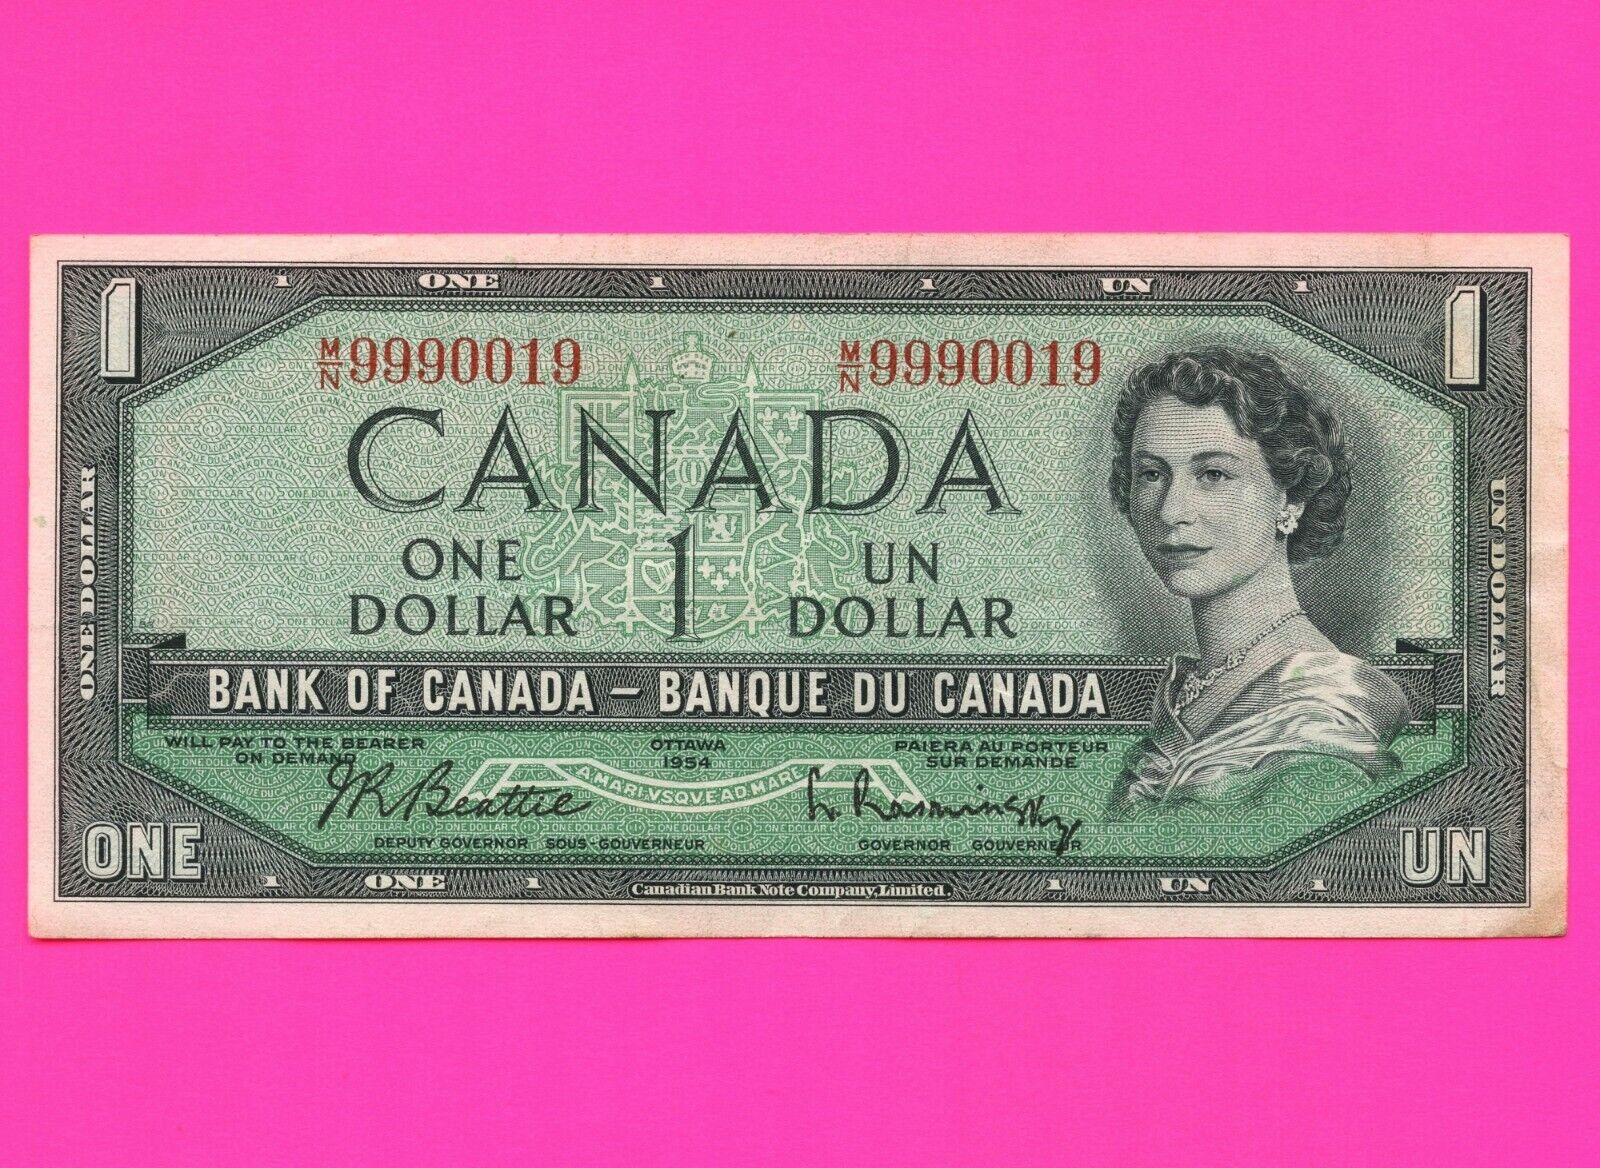 1954 Issue Canada 1 Dollar Bank Note S/N MN9990019